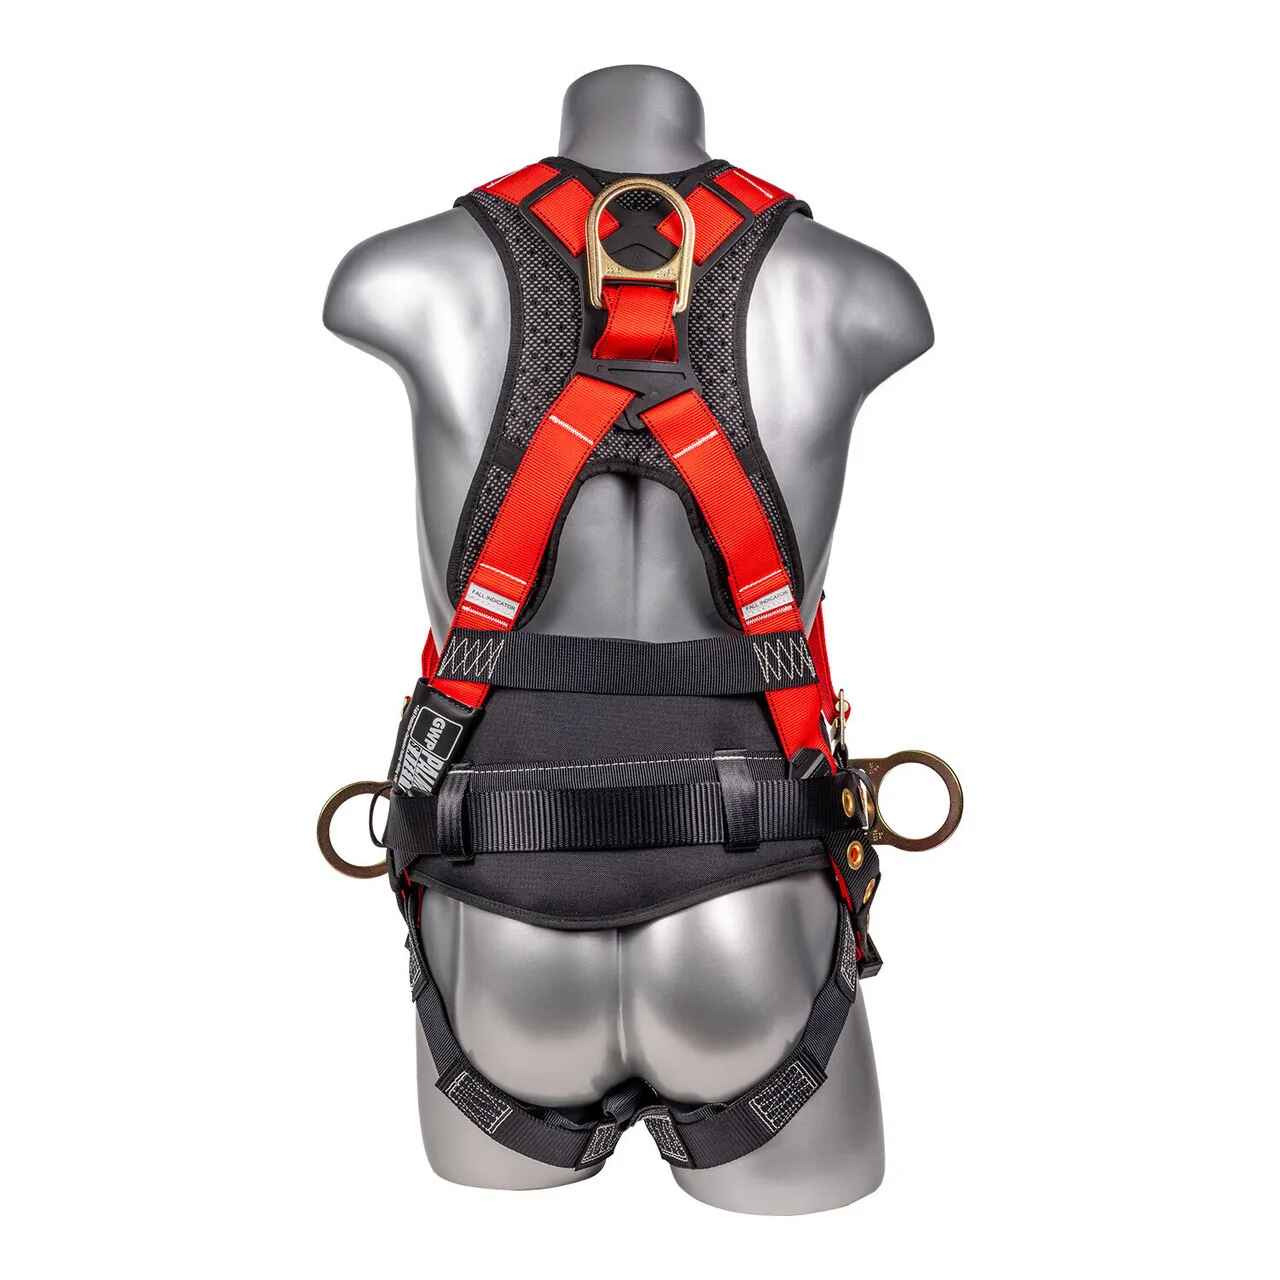 Construction Safety Harness 5 Point, QCB Chest, Grommet Legs, Red - Defender Safety